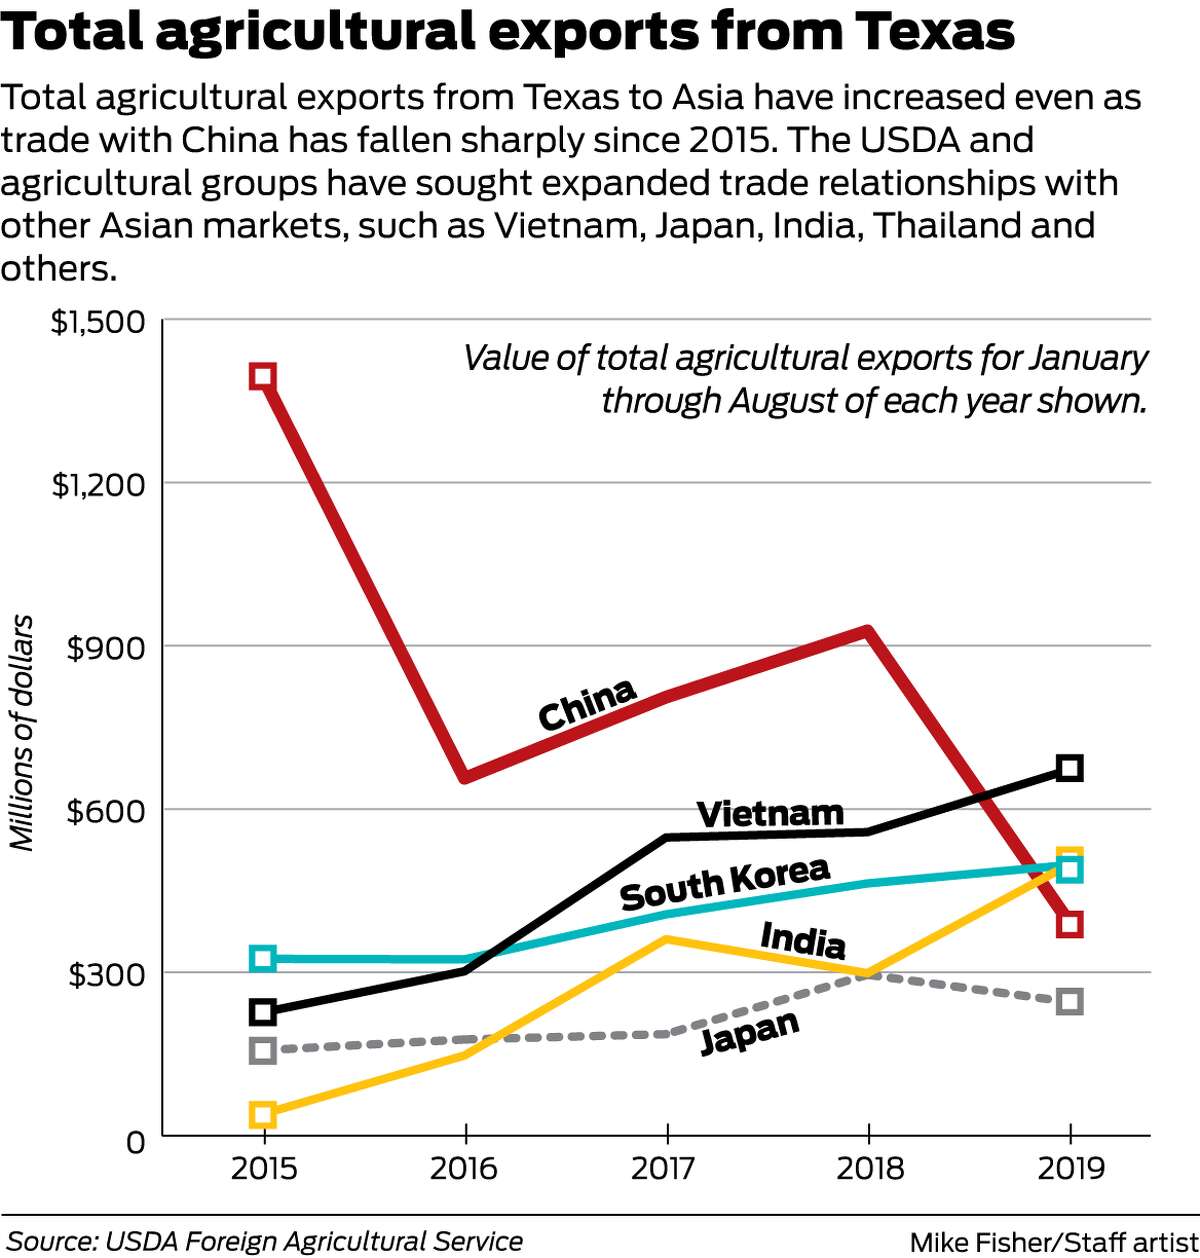 Total agricultural exports from Texas to Asia have increased even as trade with China has fallen sharply since 2015.